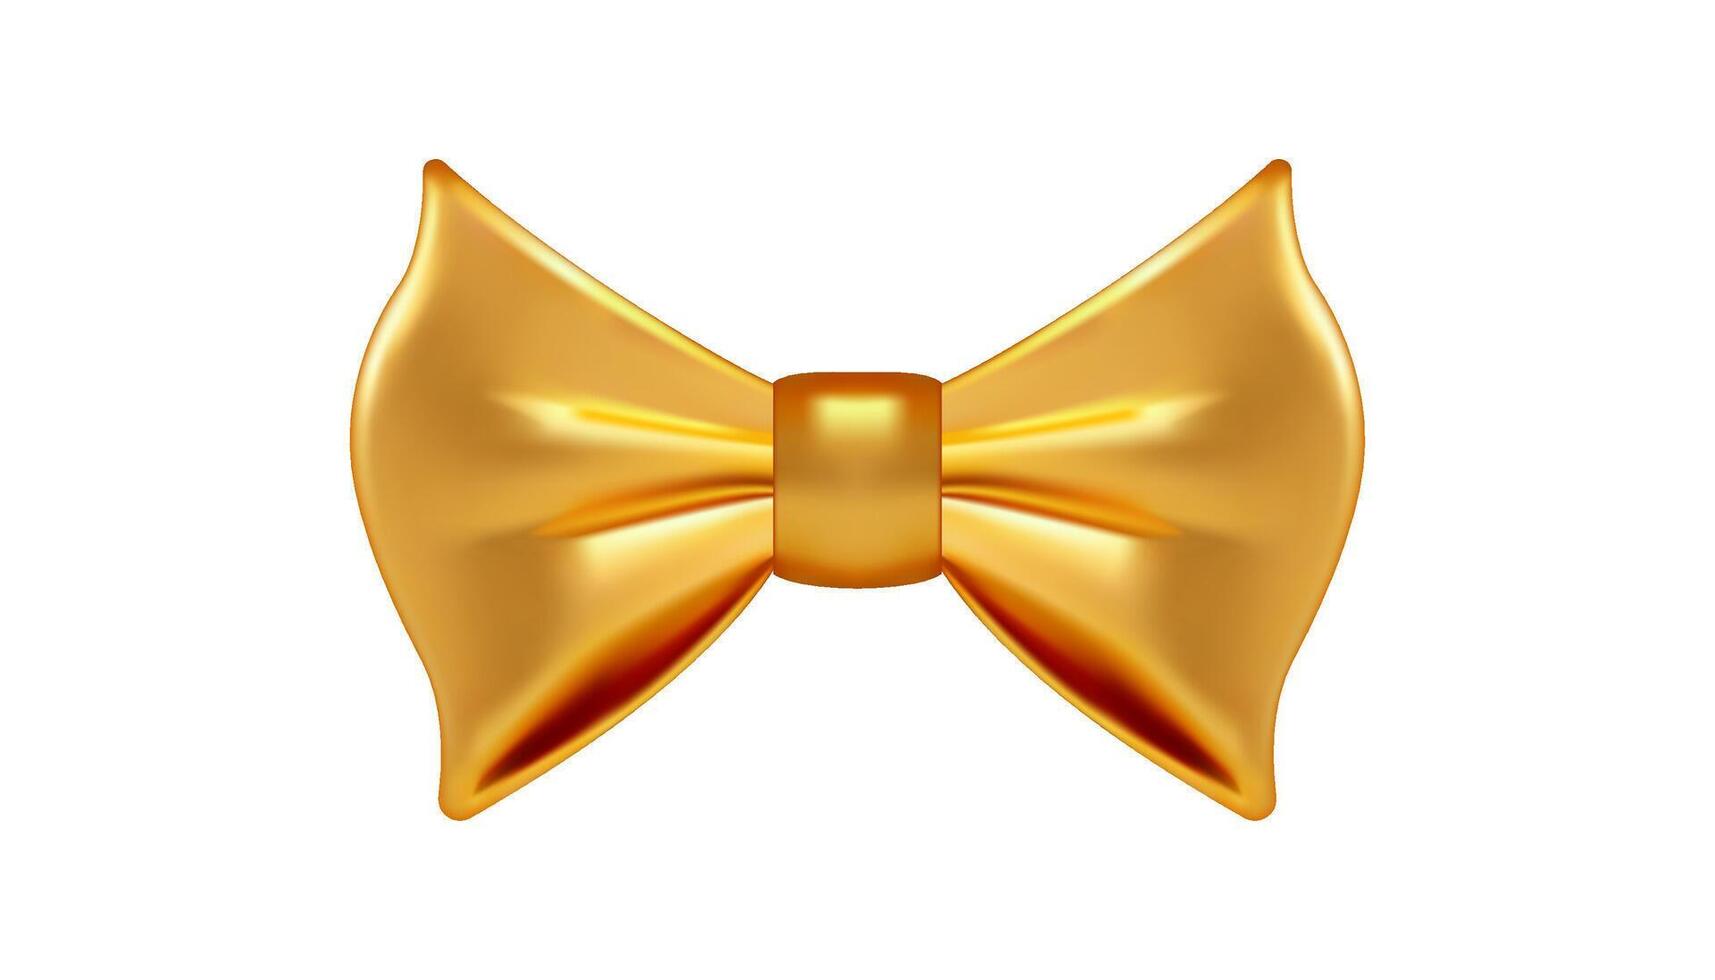 Metallic golden tie bow butterfly gentleman fashion business rich accessory 3d icon realistic vector